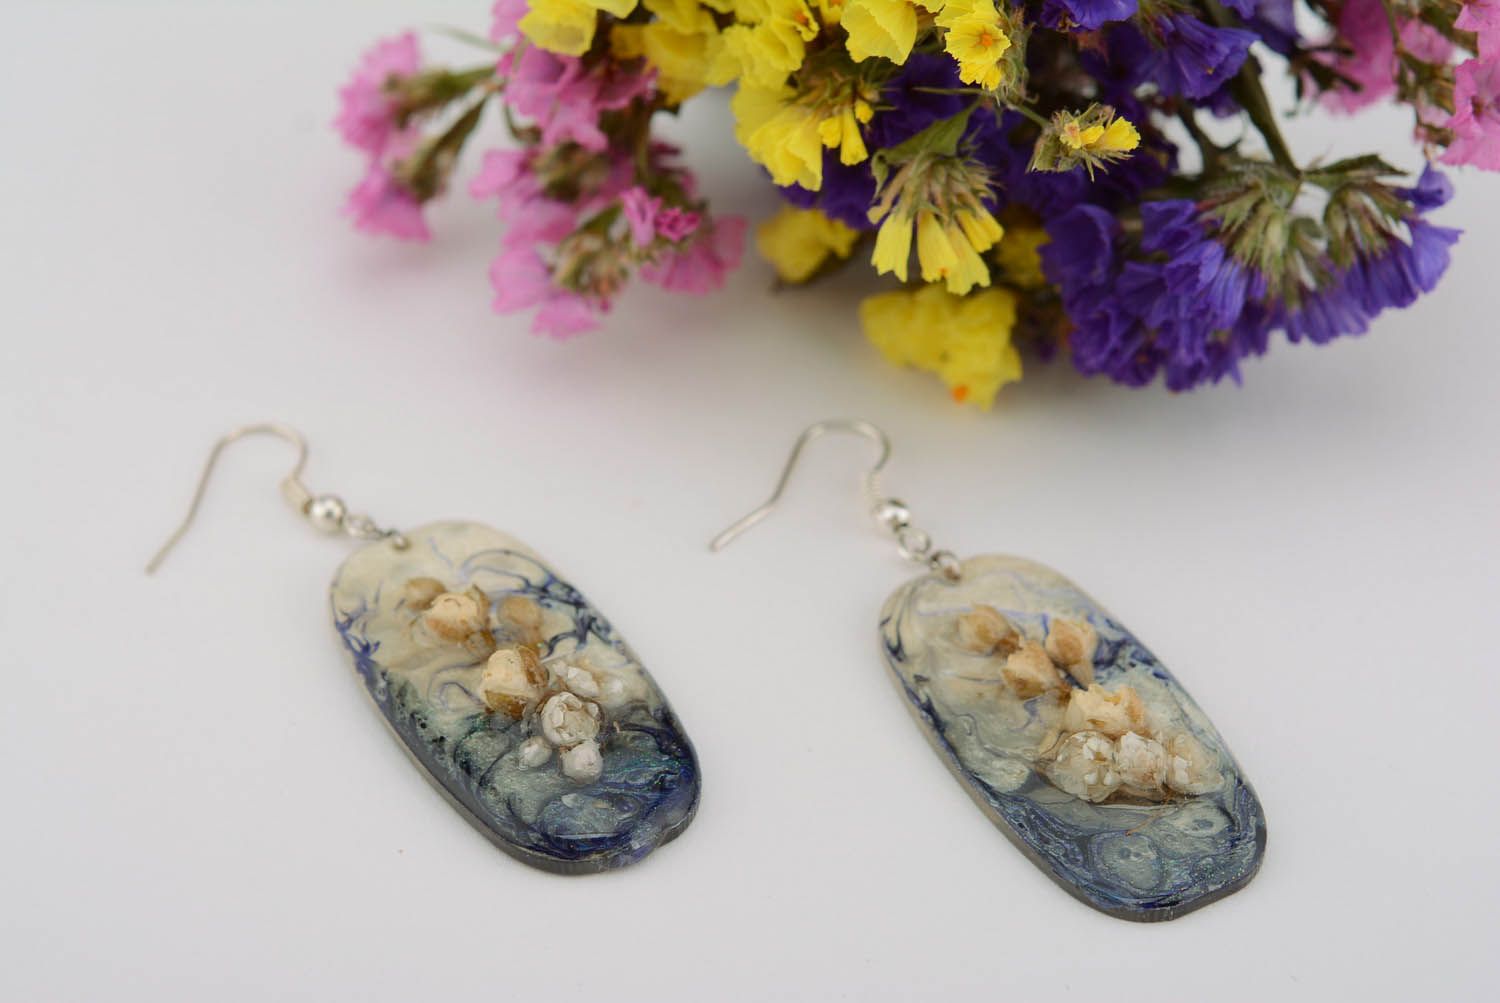 Earrings made of flowers and epoxy resin photo 1